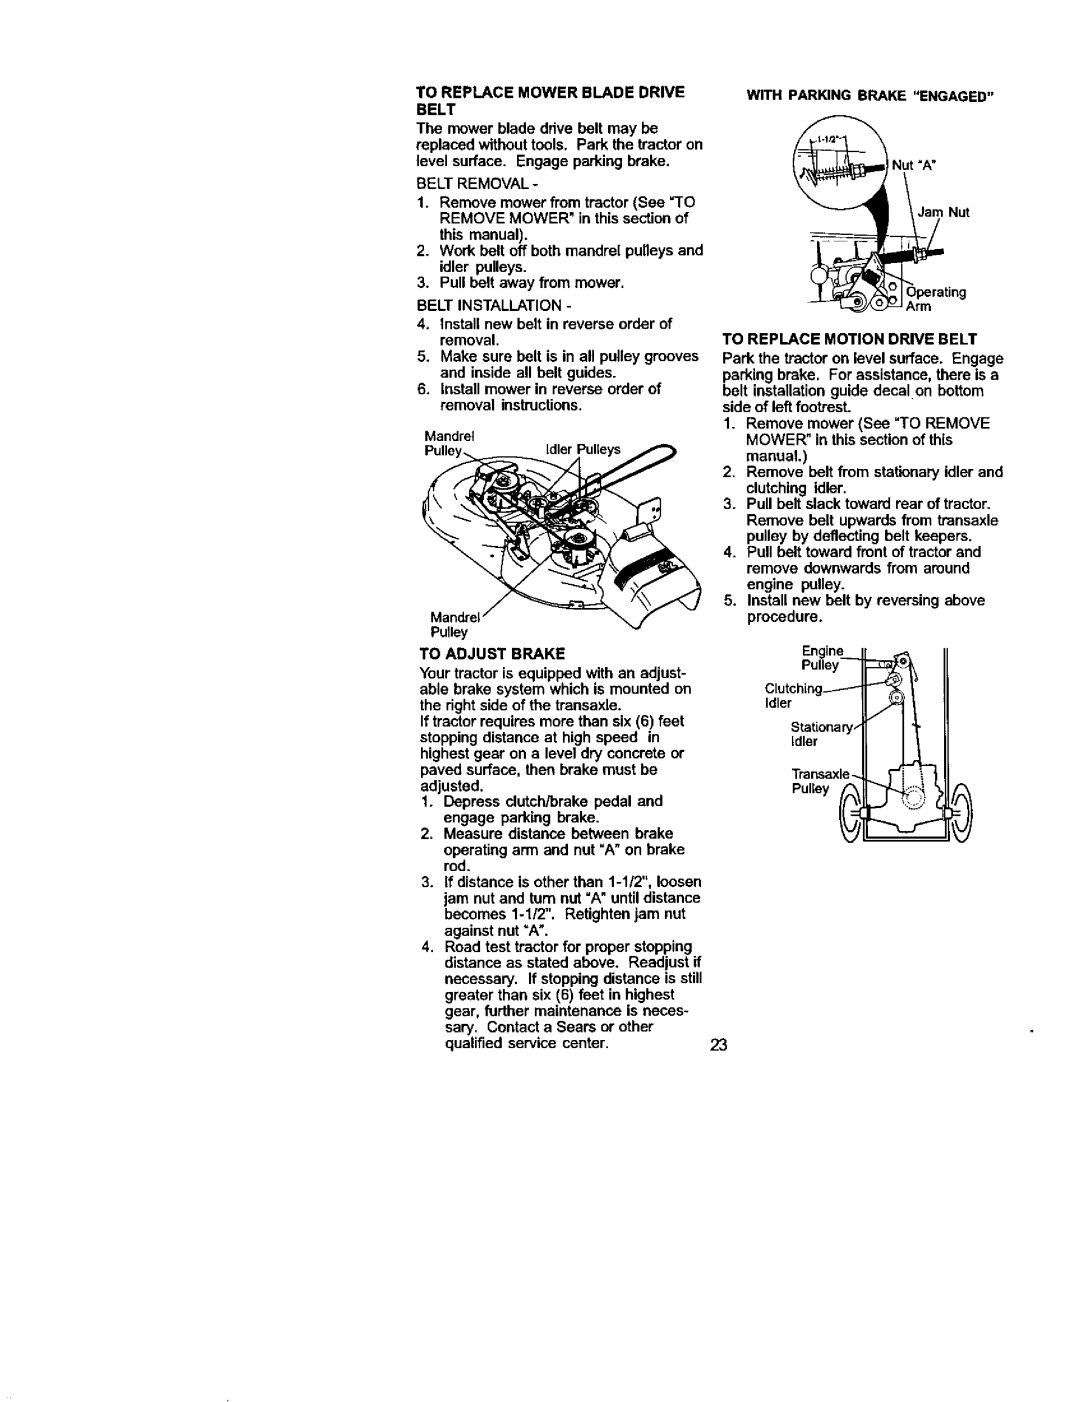 Craftsman 917.272054 owner manual To Replace Mower Blade Drive Belt 